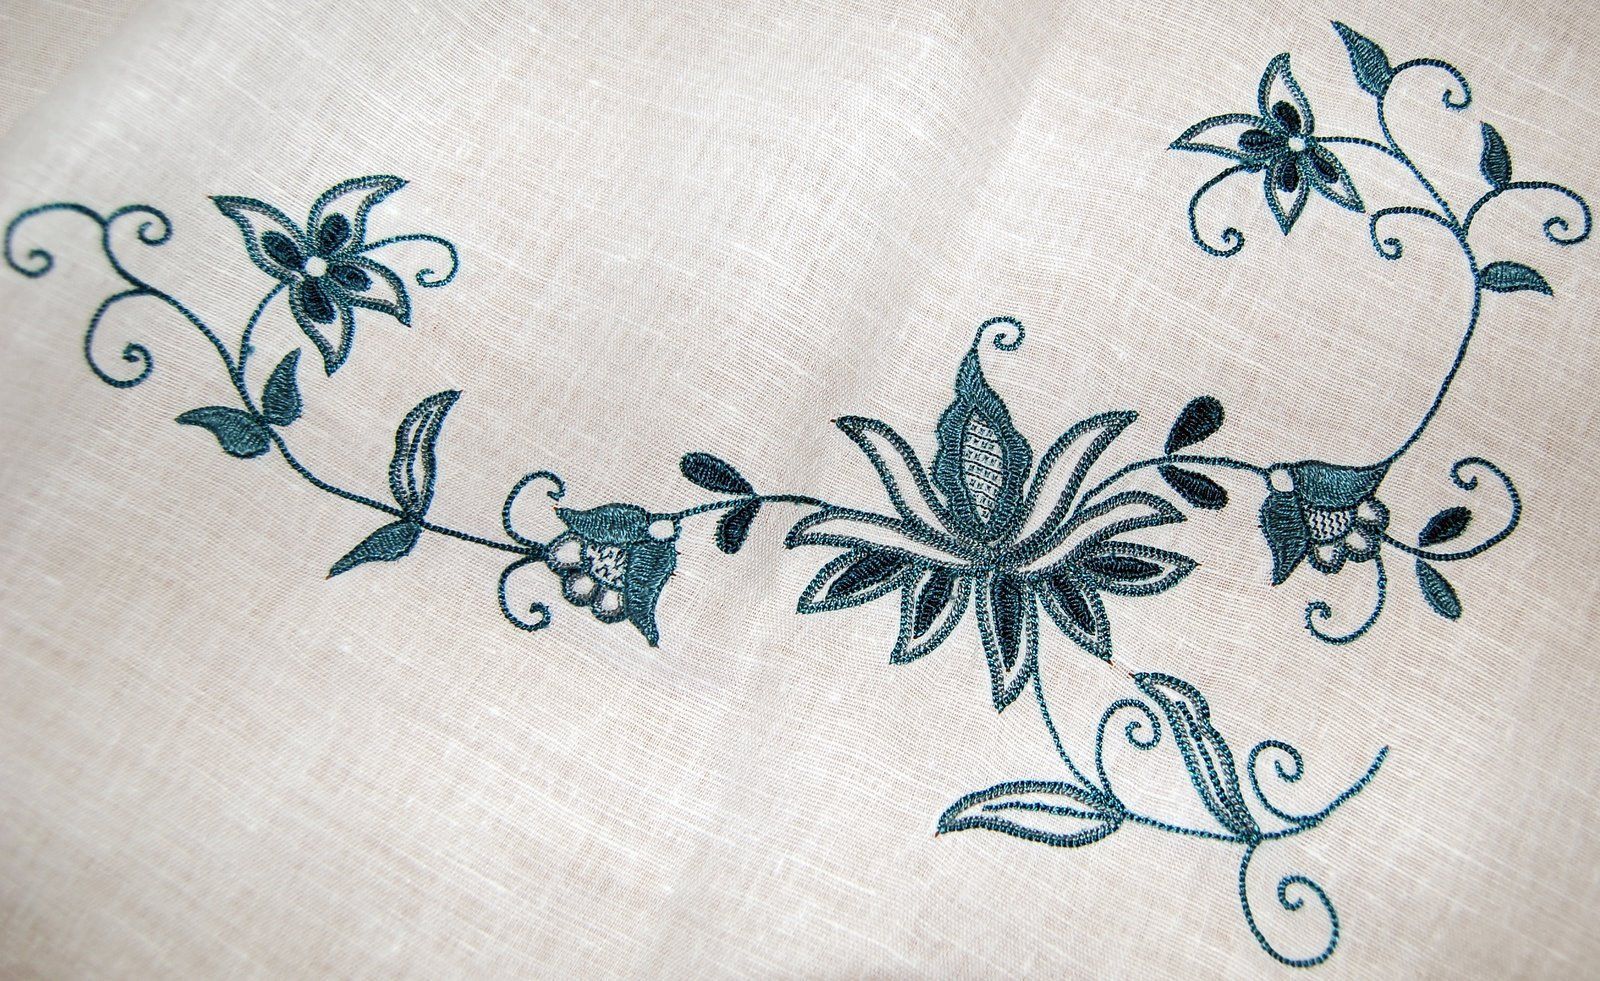 Pin en Hand embroidery patterns and designs I like